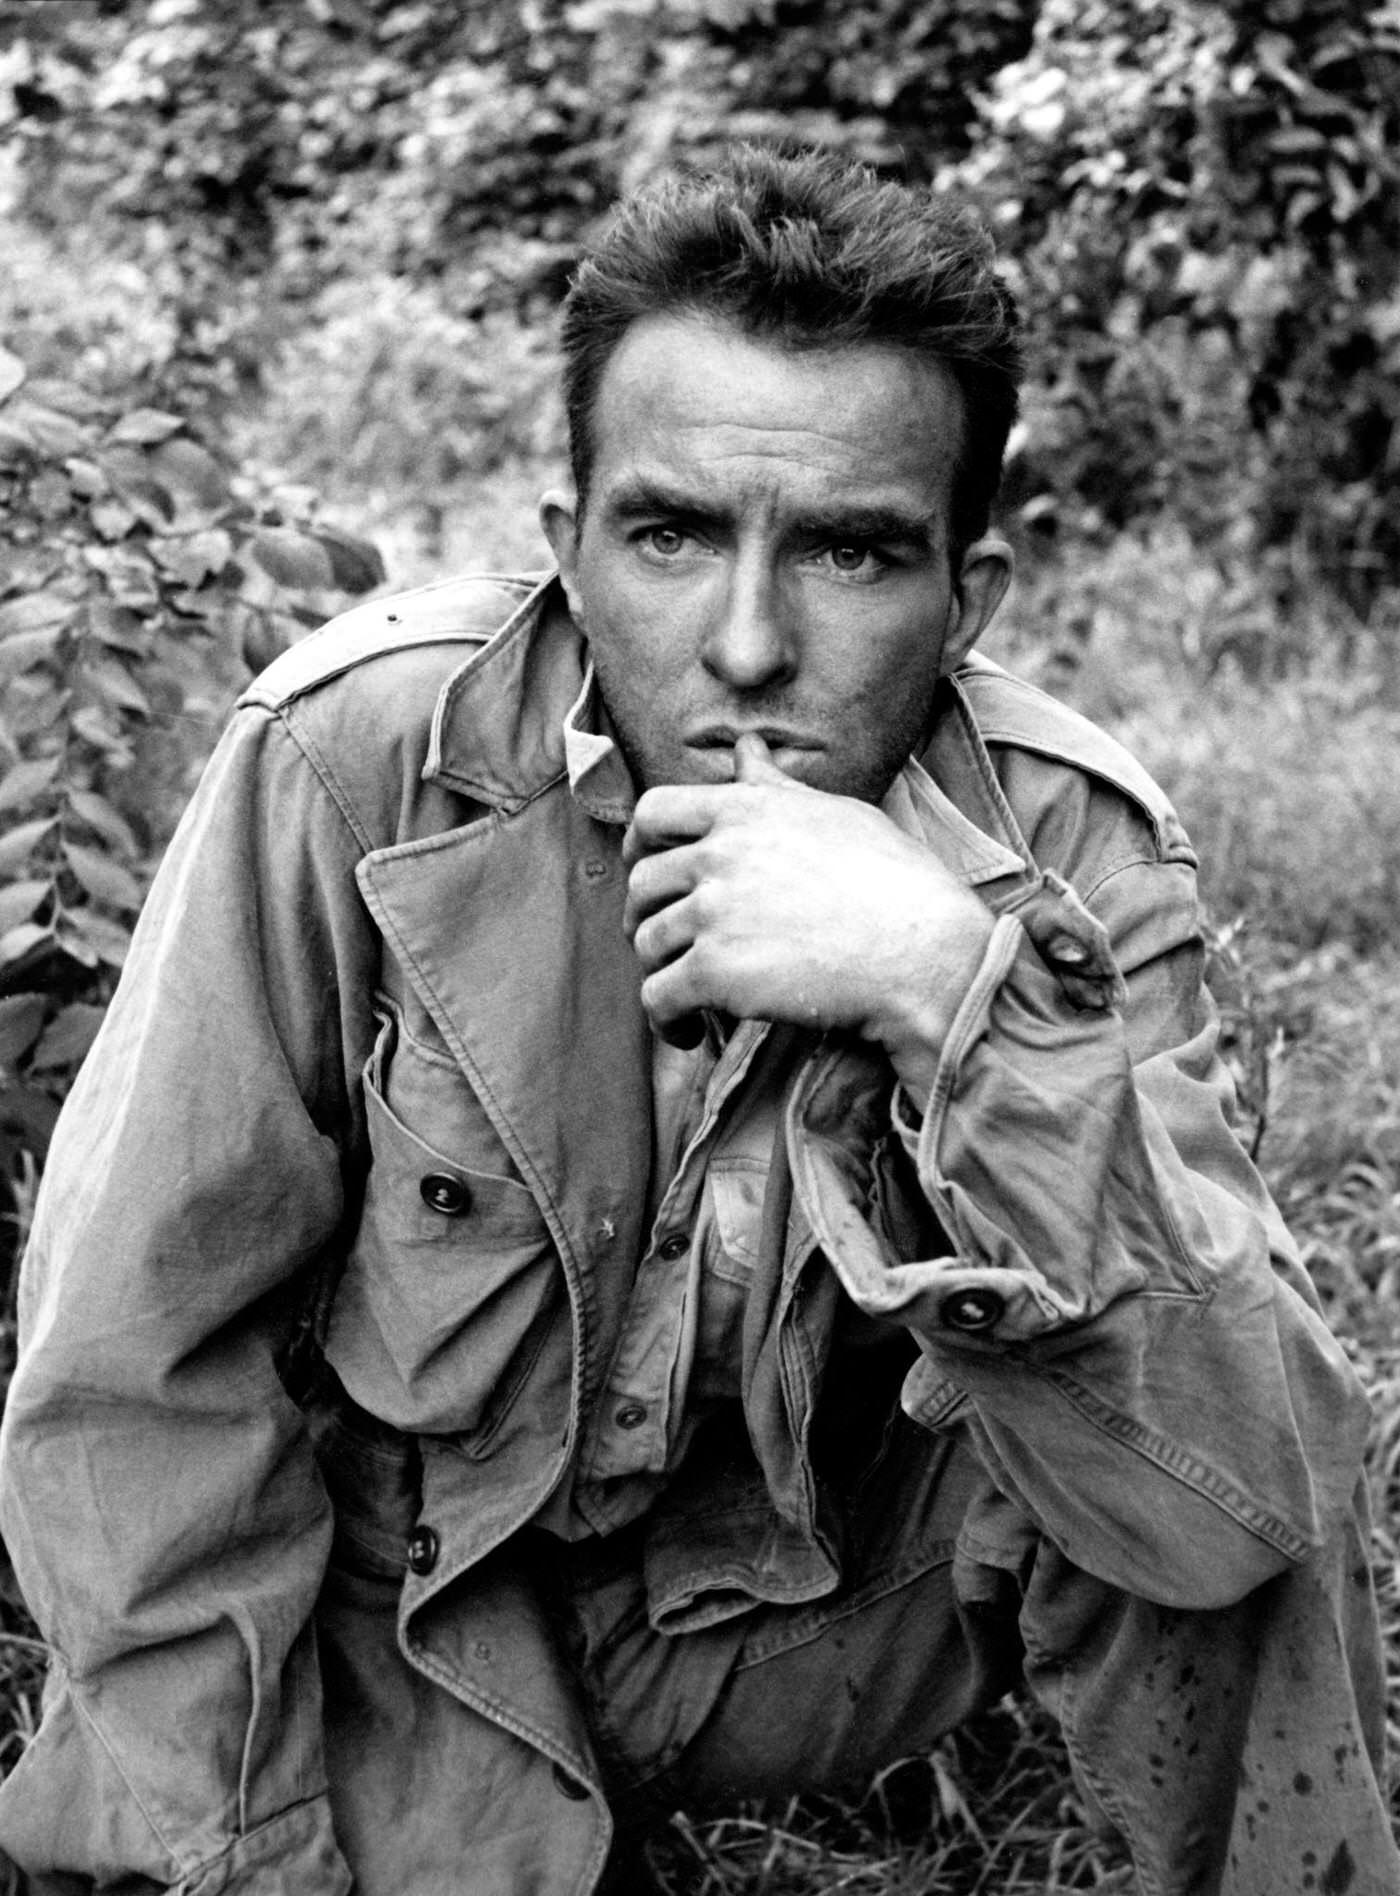 Actor Montgomery Clift poses for a portrait while shooting "The Young Lions" at the Natzweiler-Struthof Concentration Camp in France, 1957.